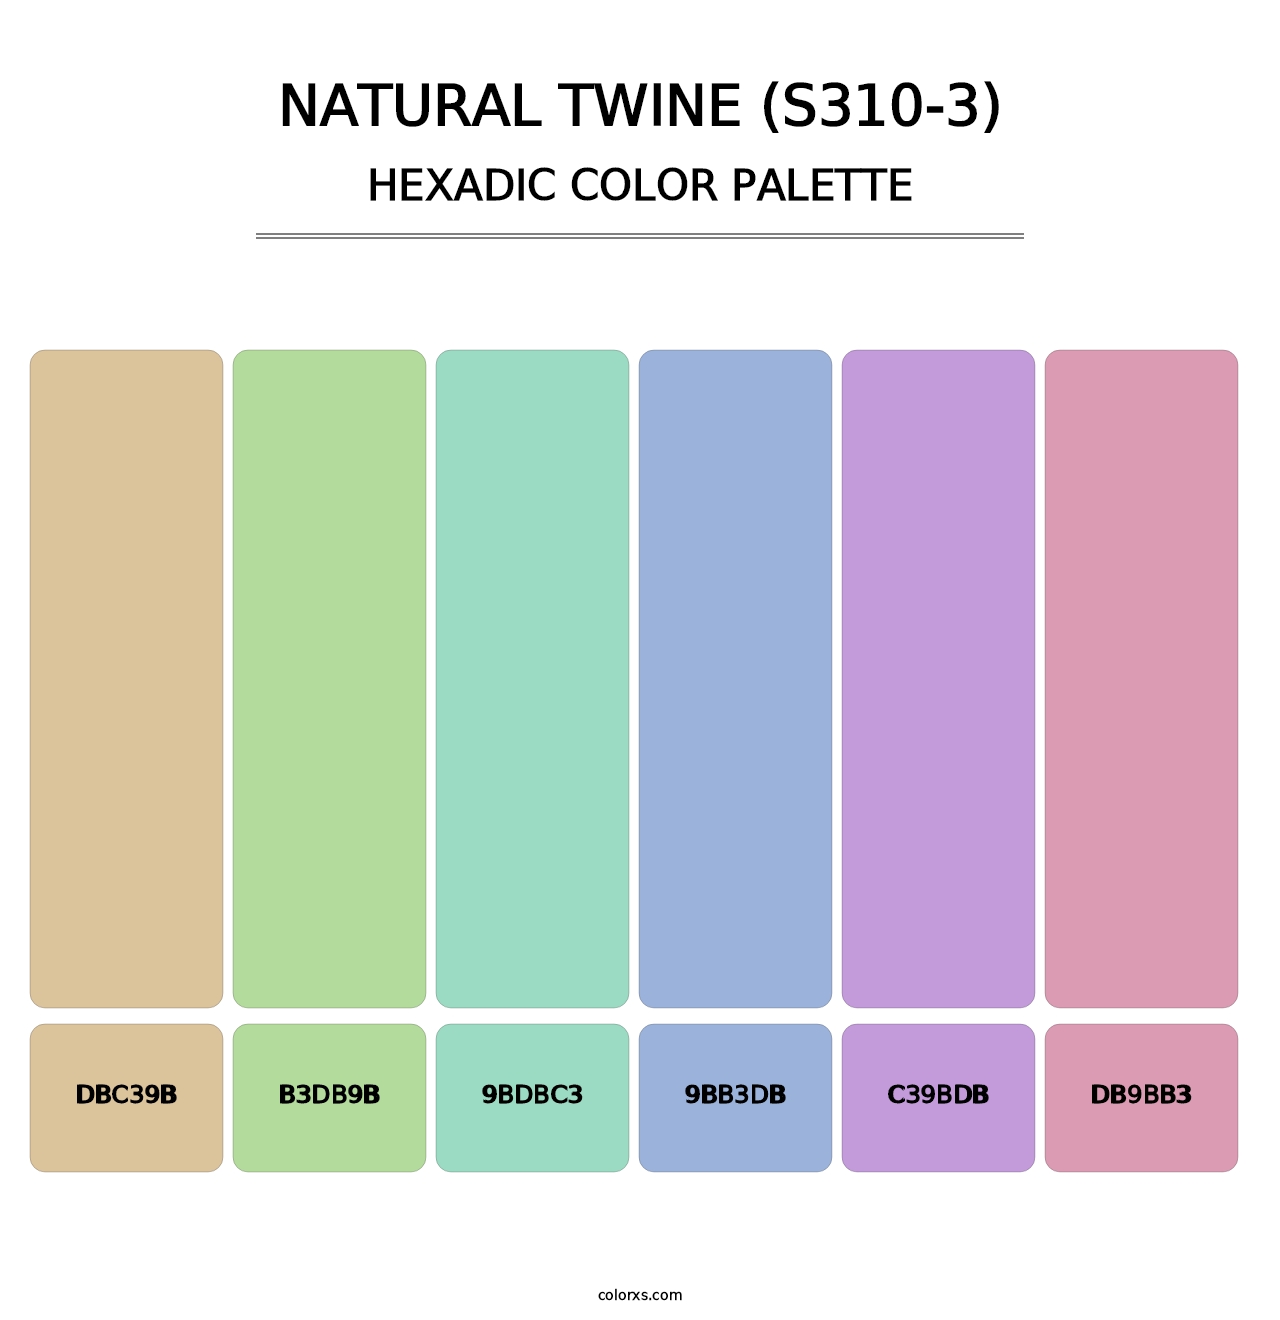 Natural Twine (S310-3) - Hexadic Color Palette